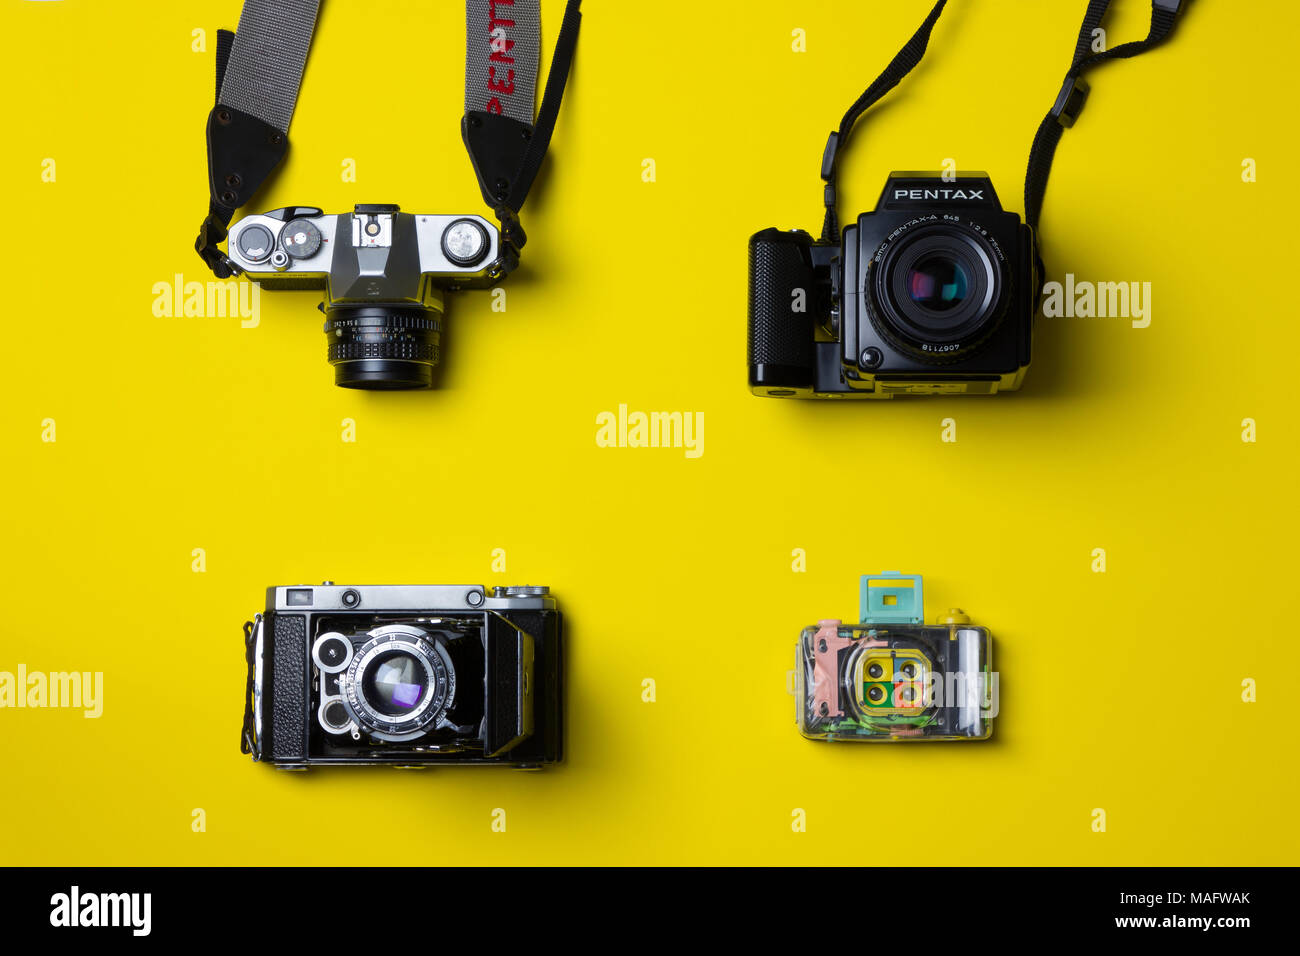 a fantastic studio shot of film cameras taken from above against a bright yellow background Stock Photo